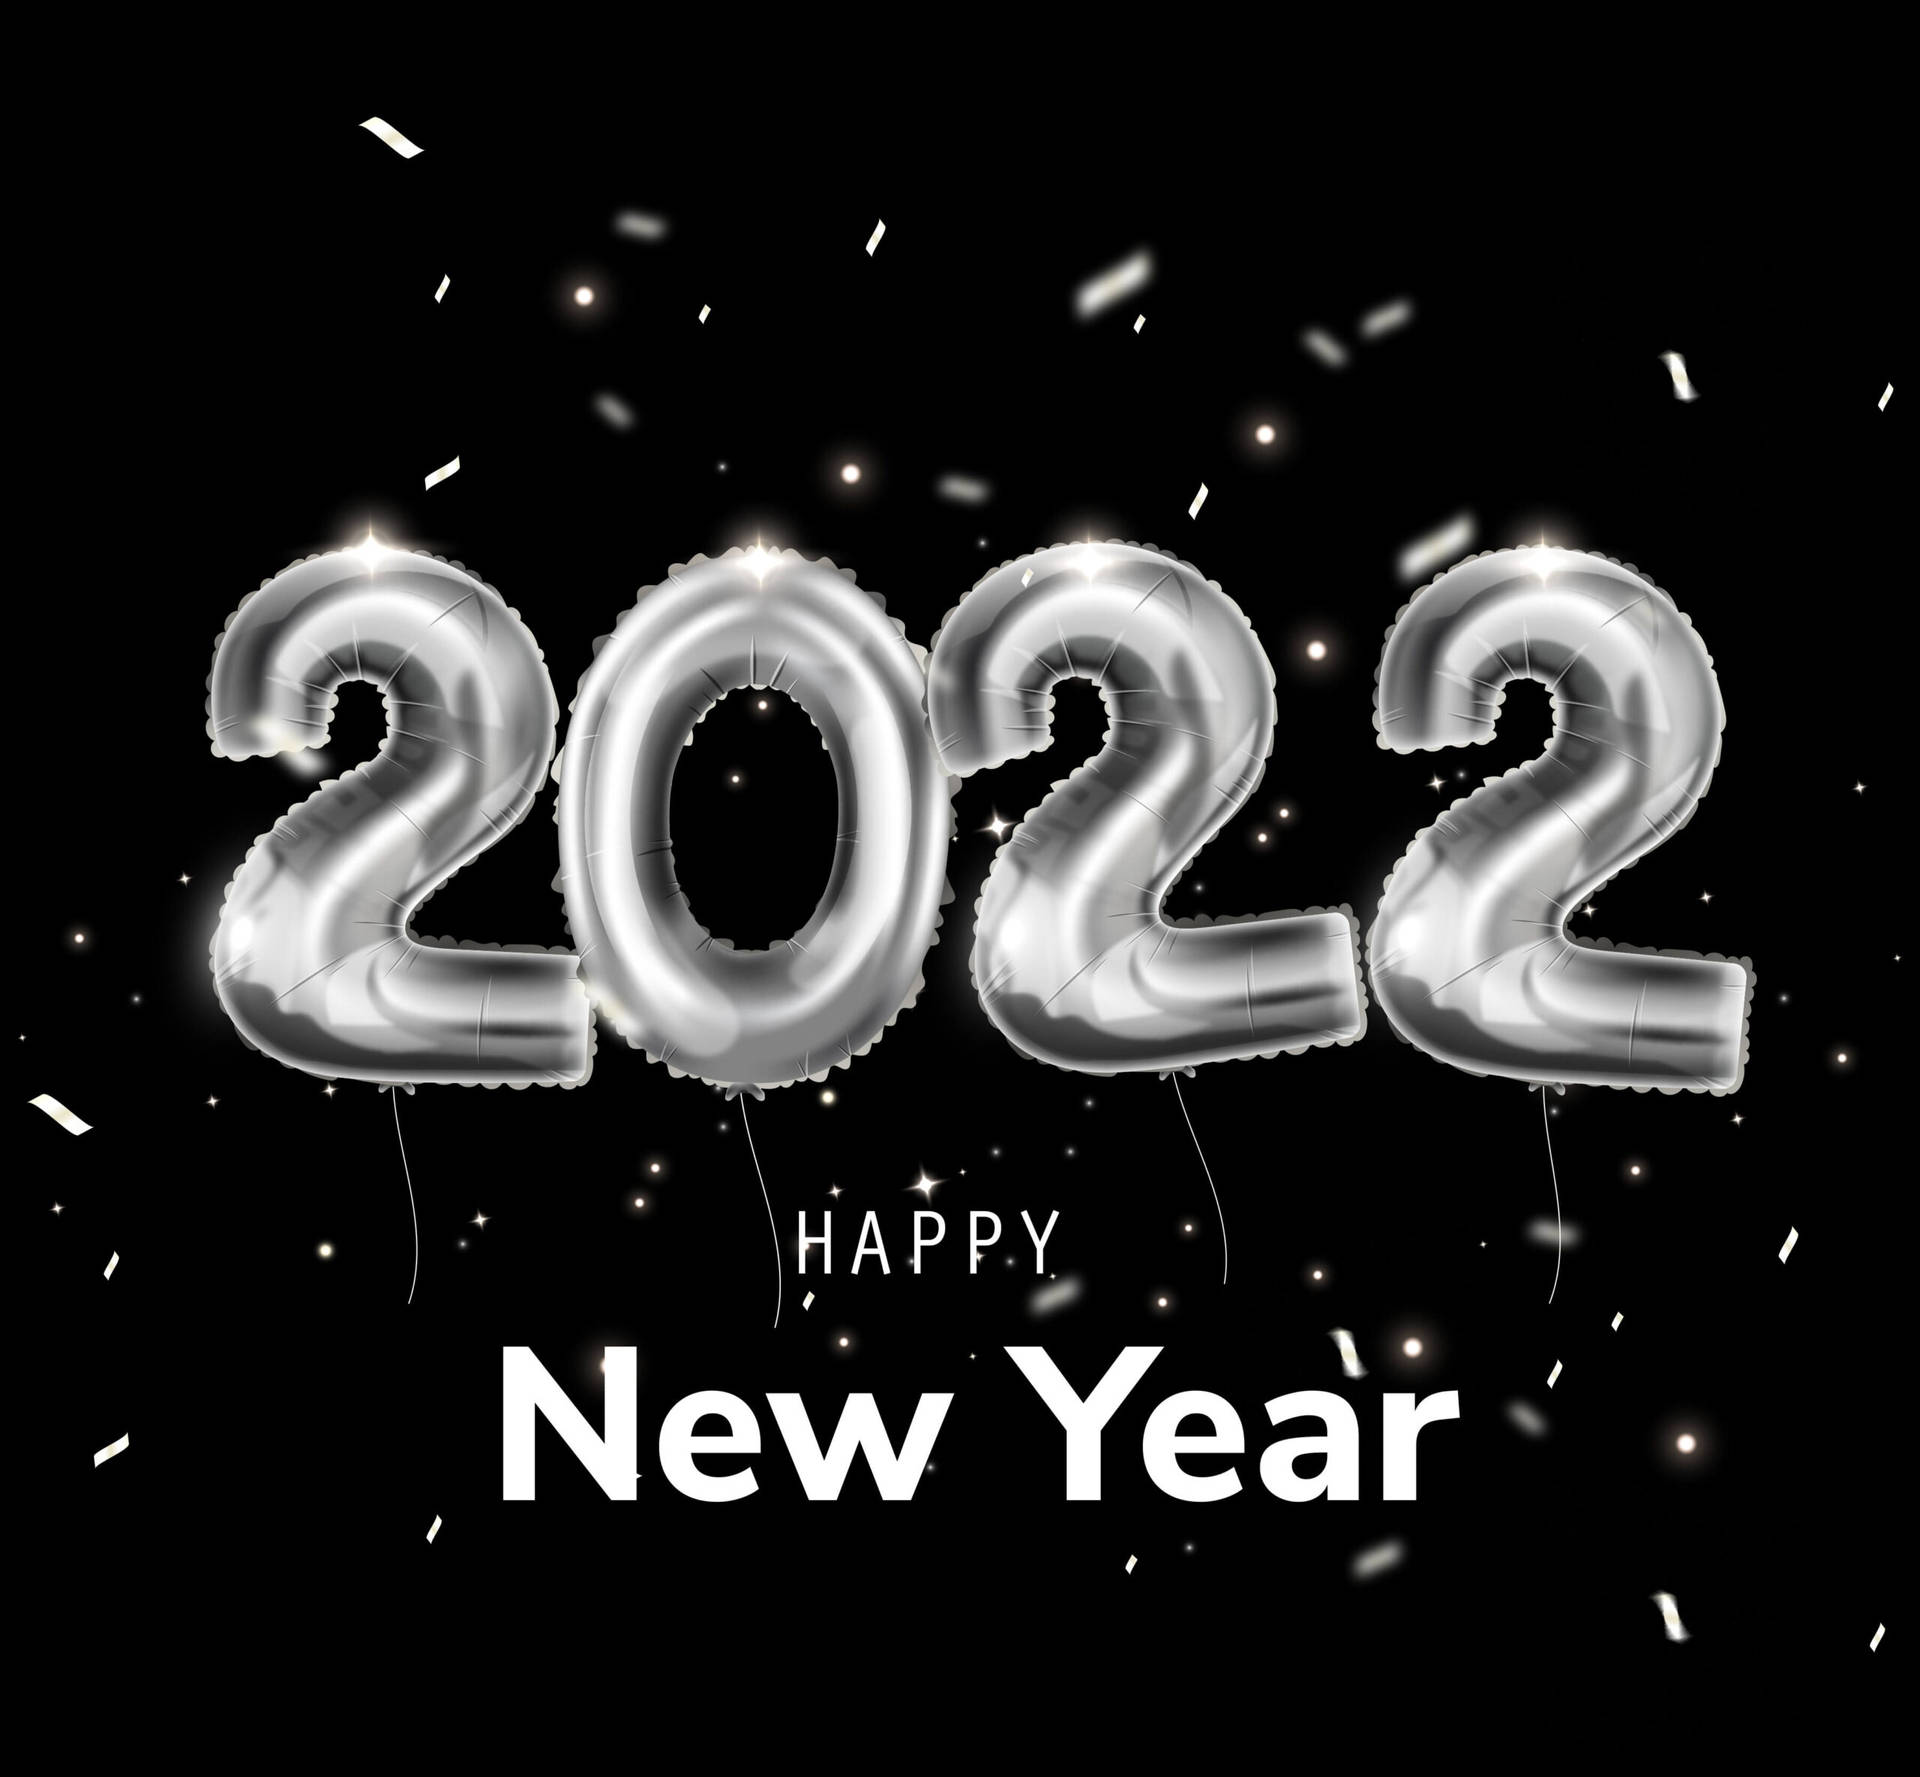 Happy New Year 2022 Silver Balloons Wallpaper